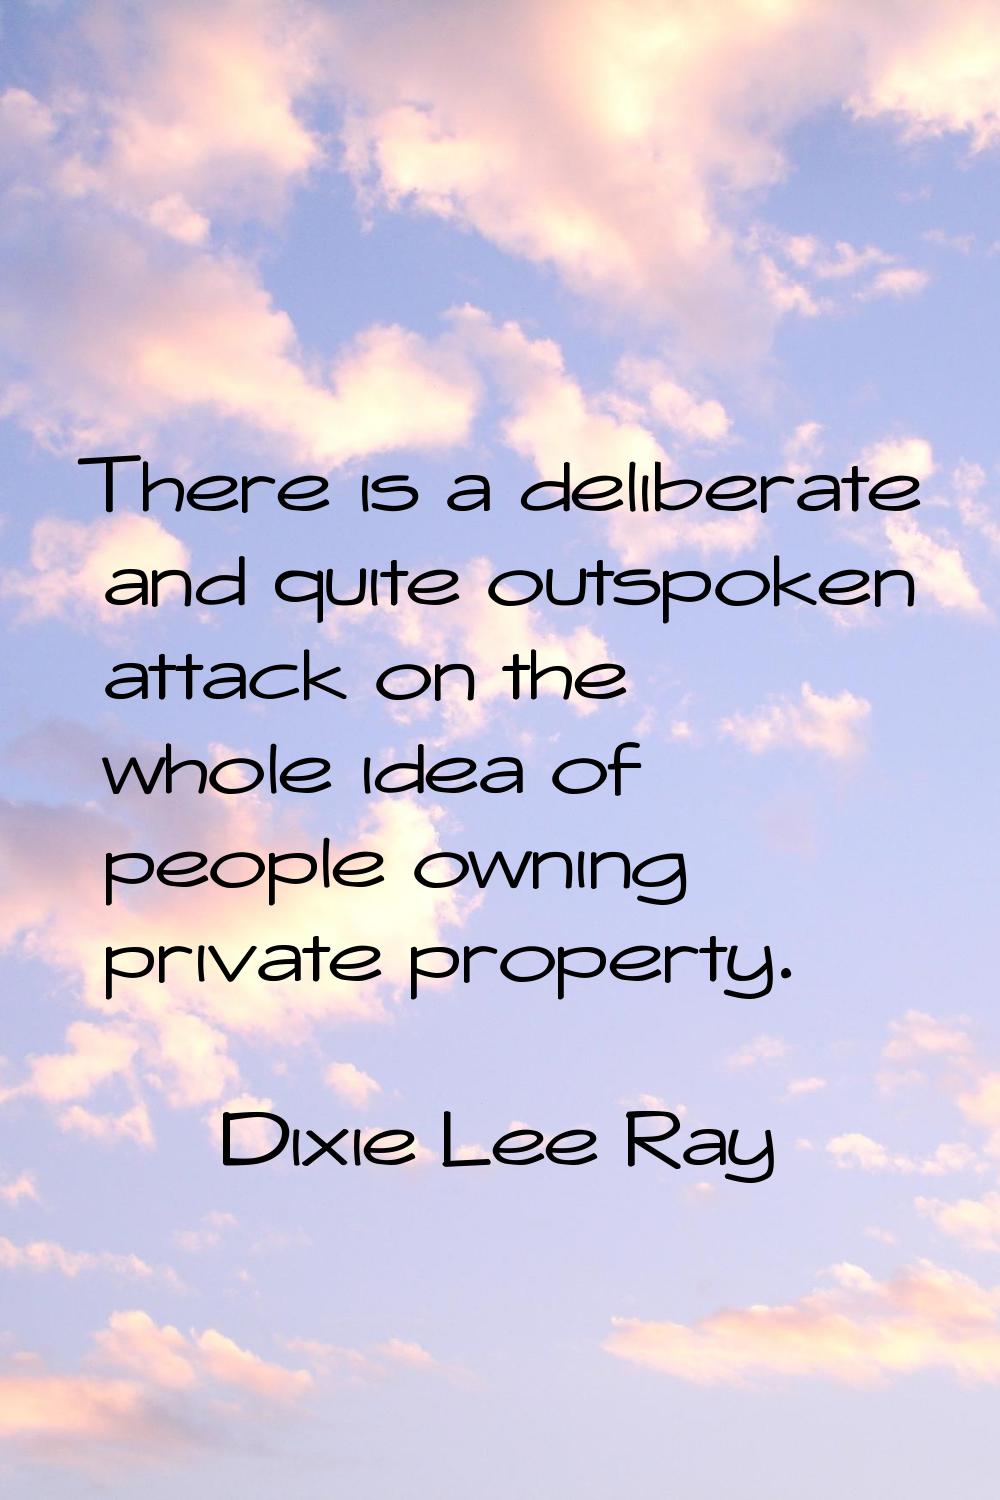 There is a deliberate and quite outspoken attack on the whole idea of people owning private propert